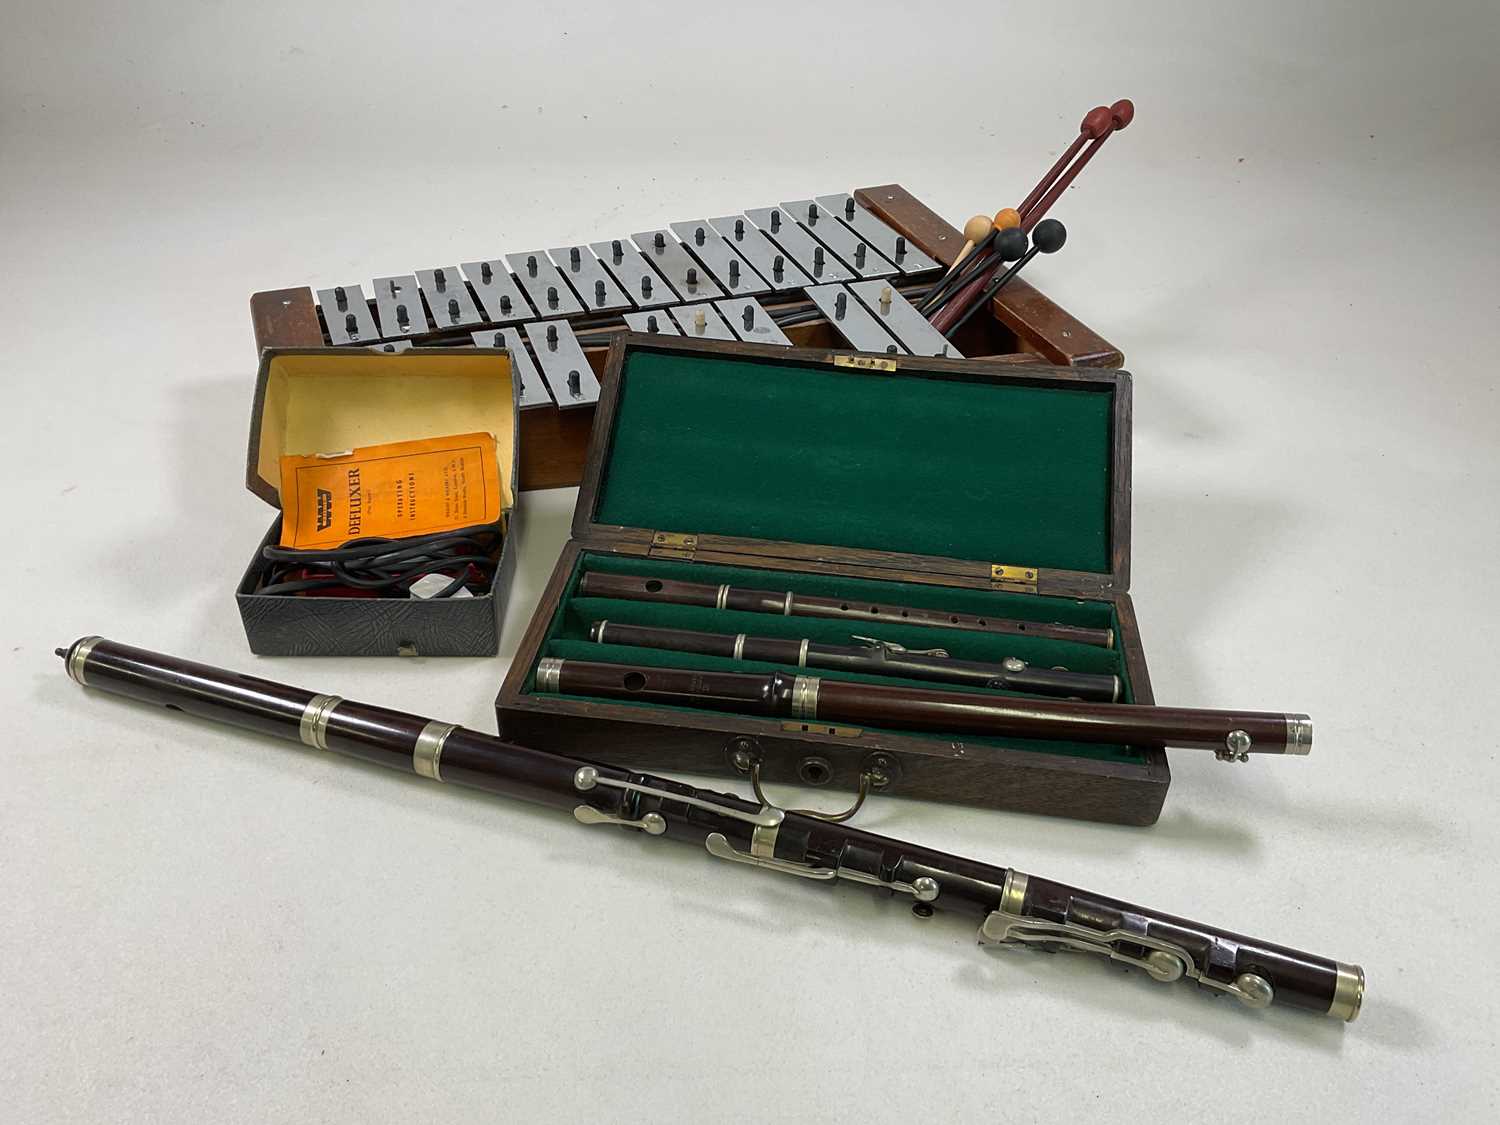 A flute by Rushworth and Dreaper, three piccolos (in box), and a xylophone.